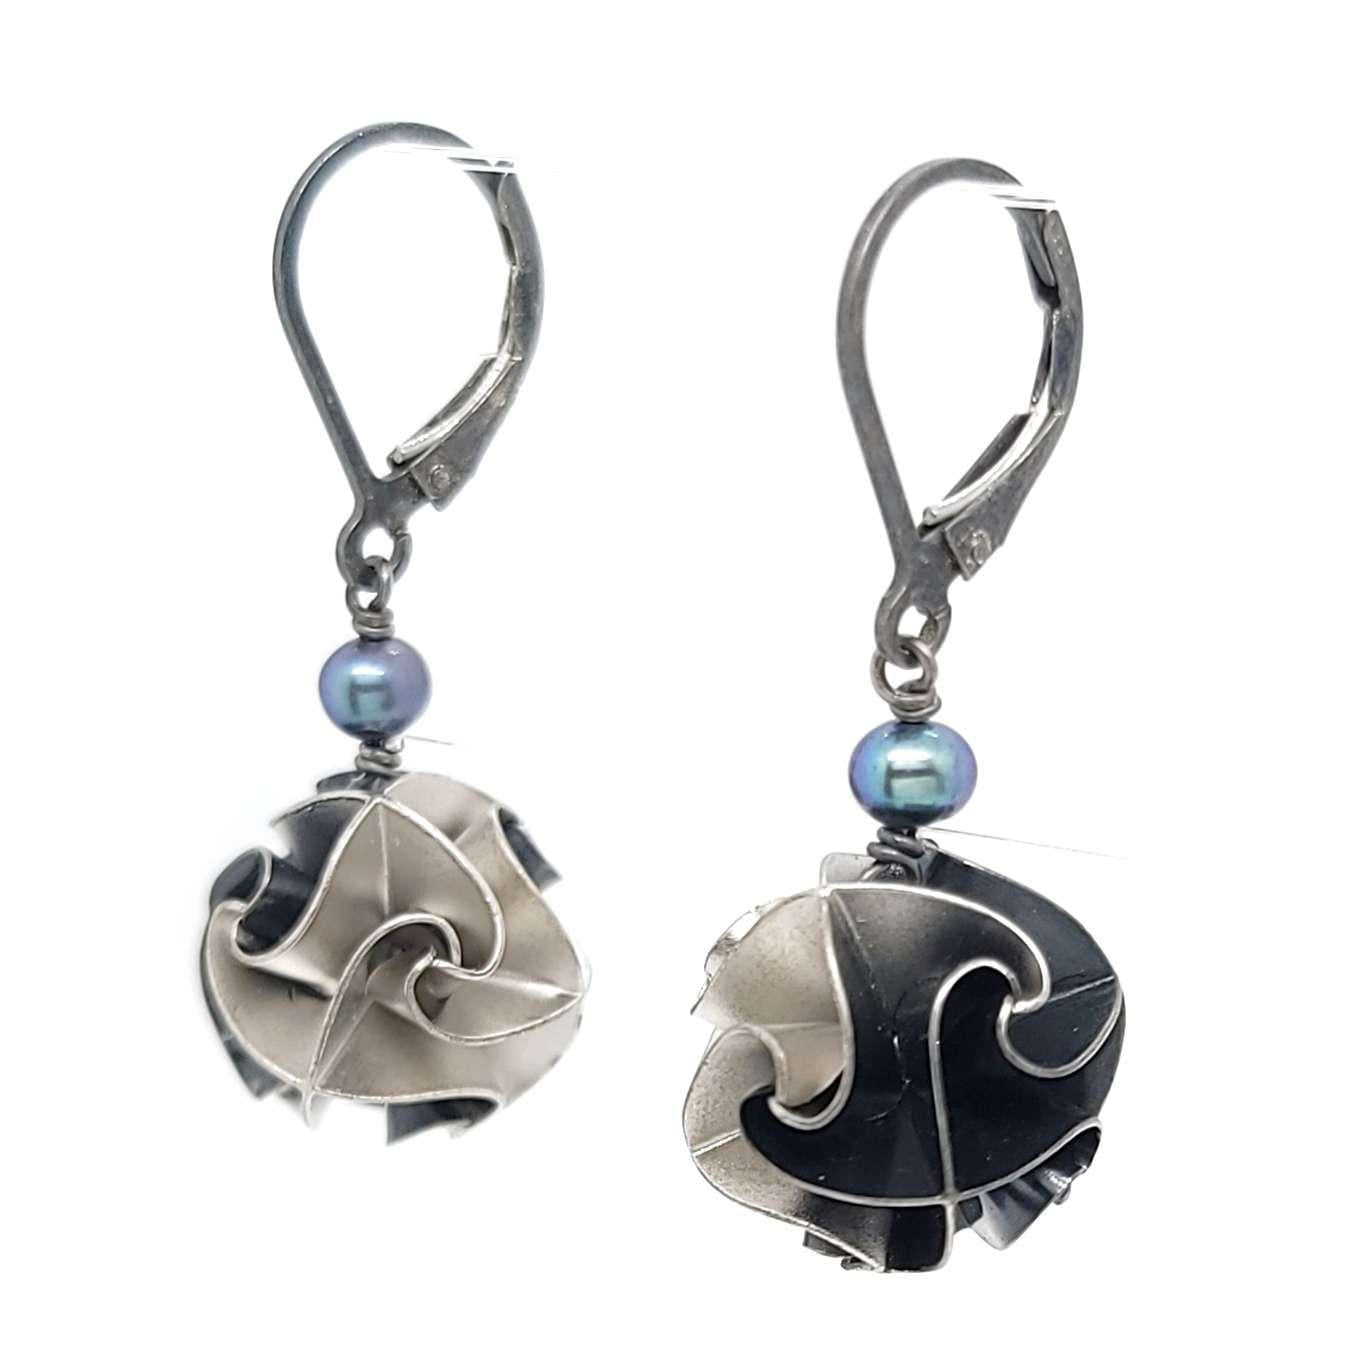 Earrings - Small Pearl Flora Drops in Bright and Oxidized Sterling Silver by 314 Studio